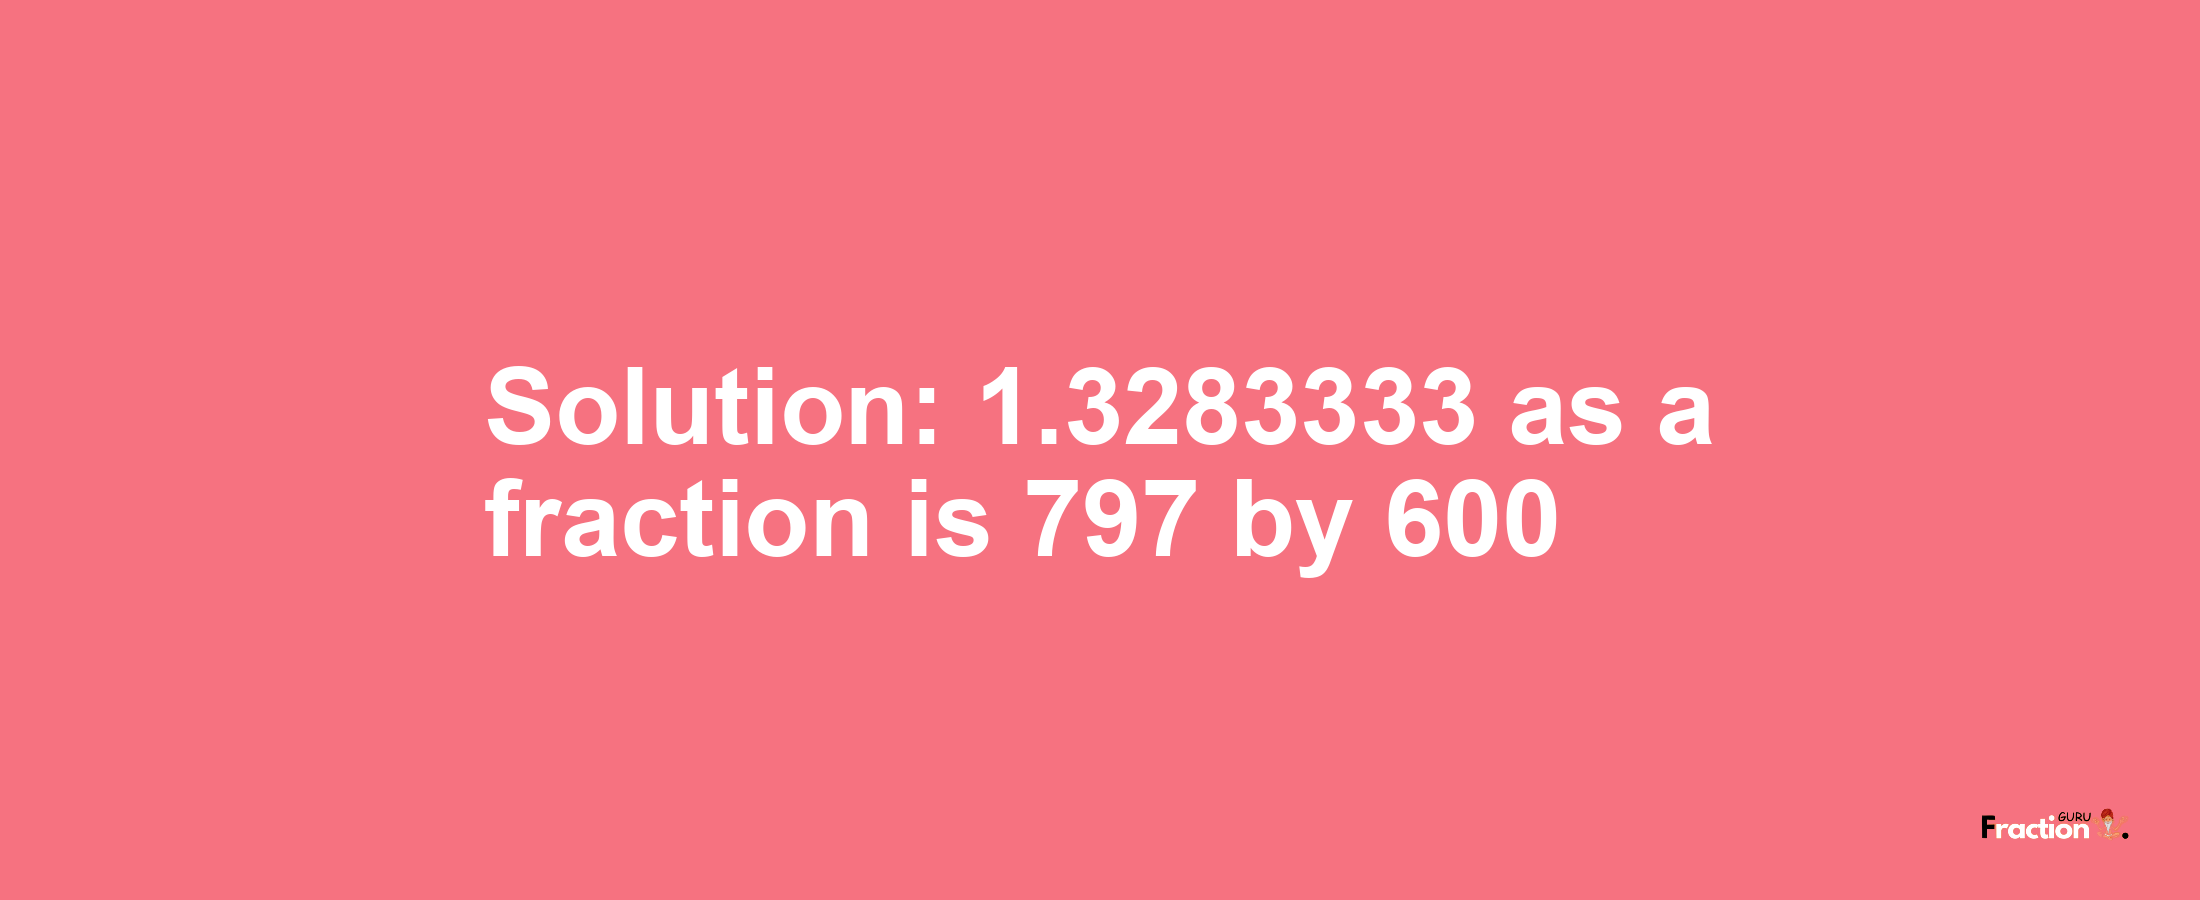 Solution:1.3283333 as a fraction is 797/600